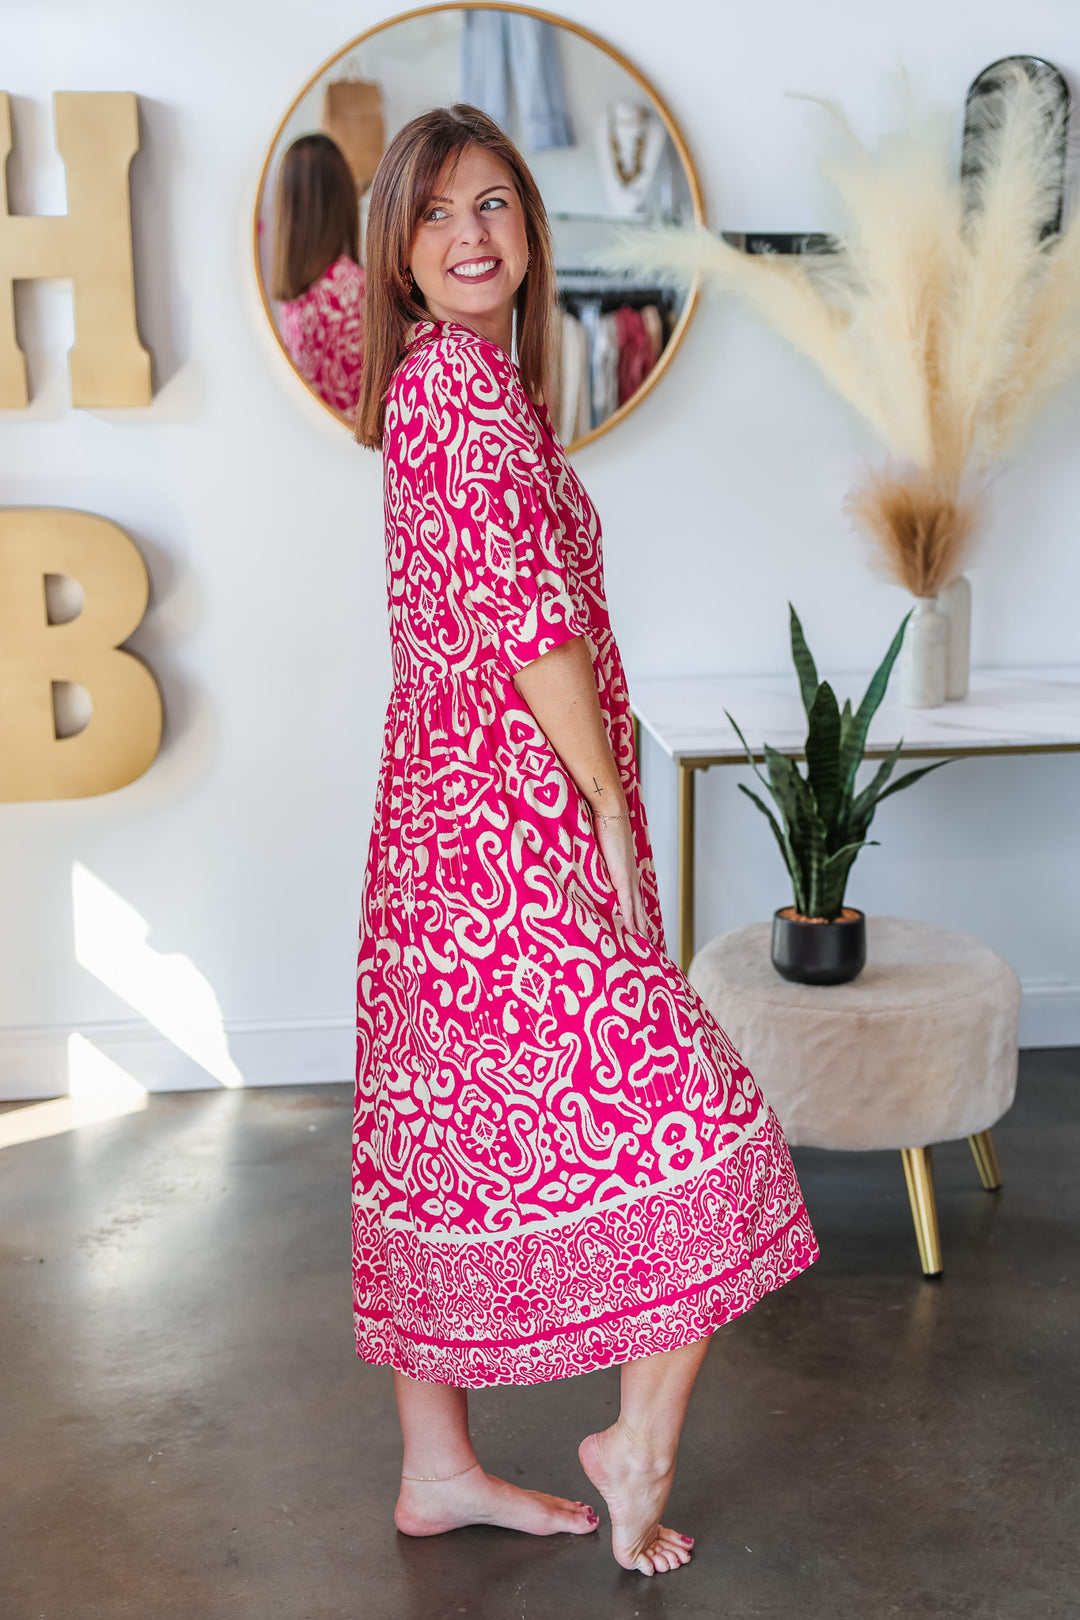 A brunette woman standing in a shop wearing a fuchsia and cream colored long dress with a button closure on top and 3/4 length sleeves.